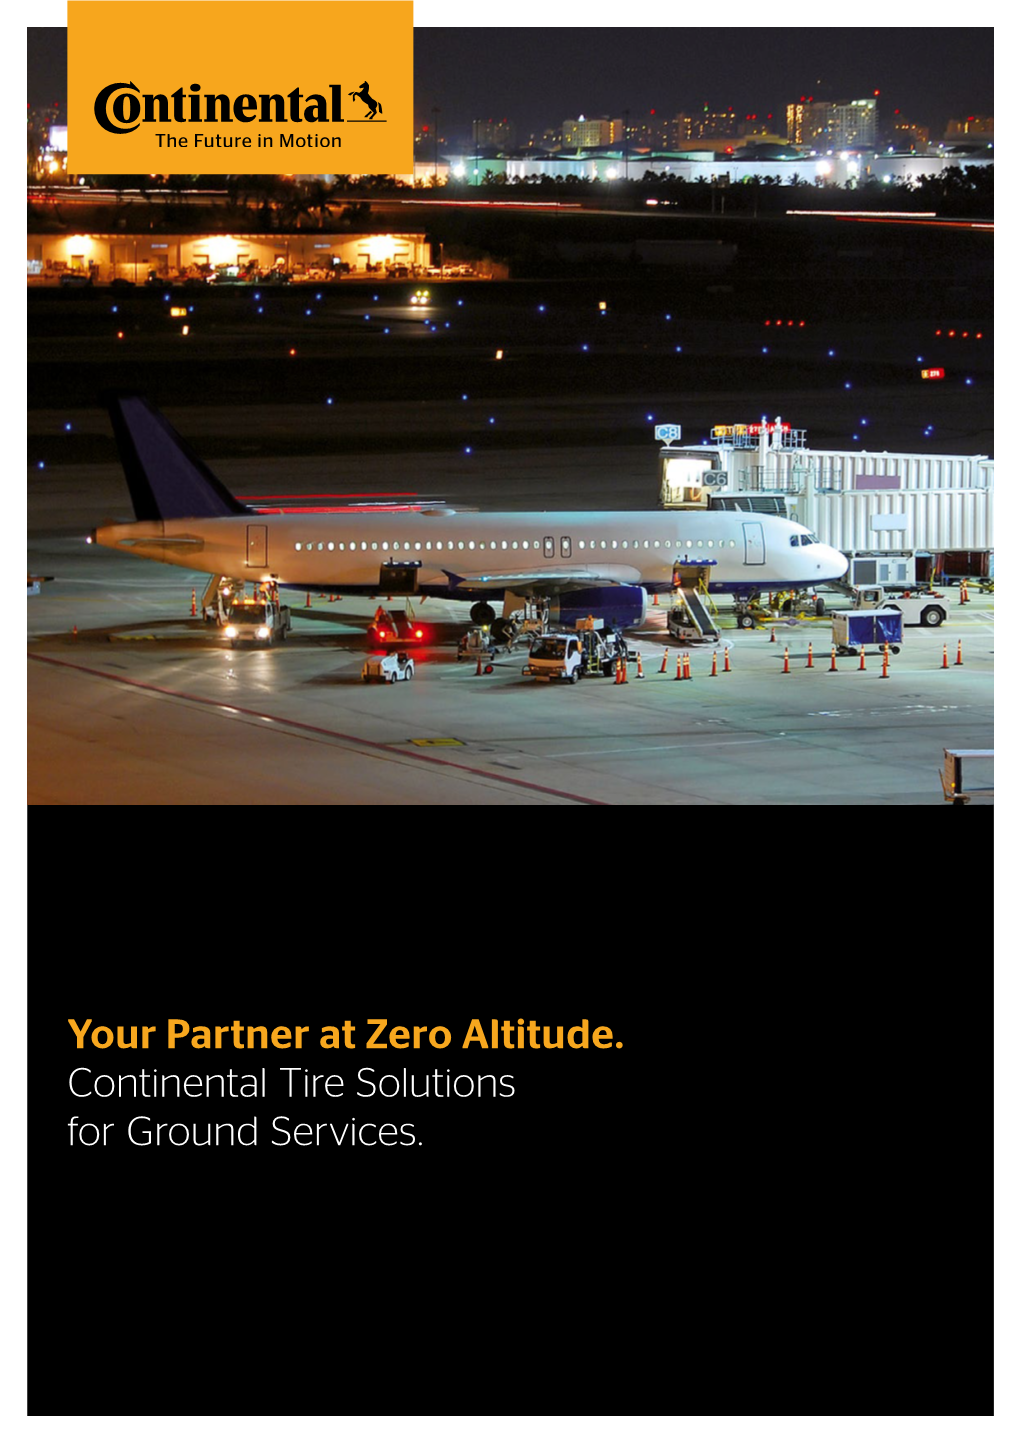 Your Partner at Zero Altitude. Continental Tire Solutions for Ground Services. 2